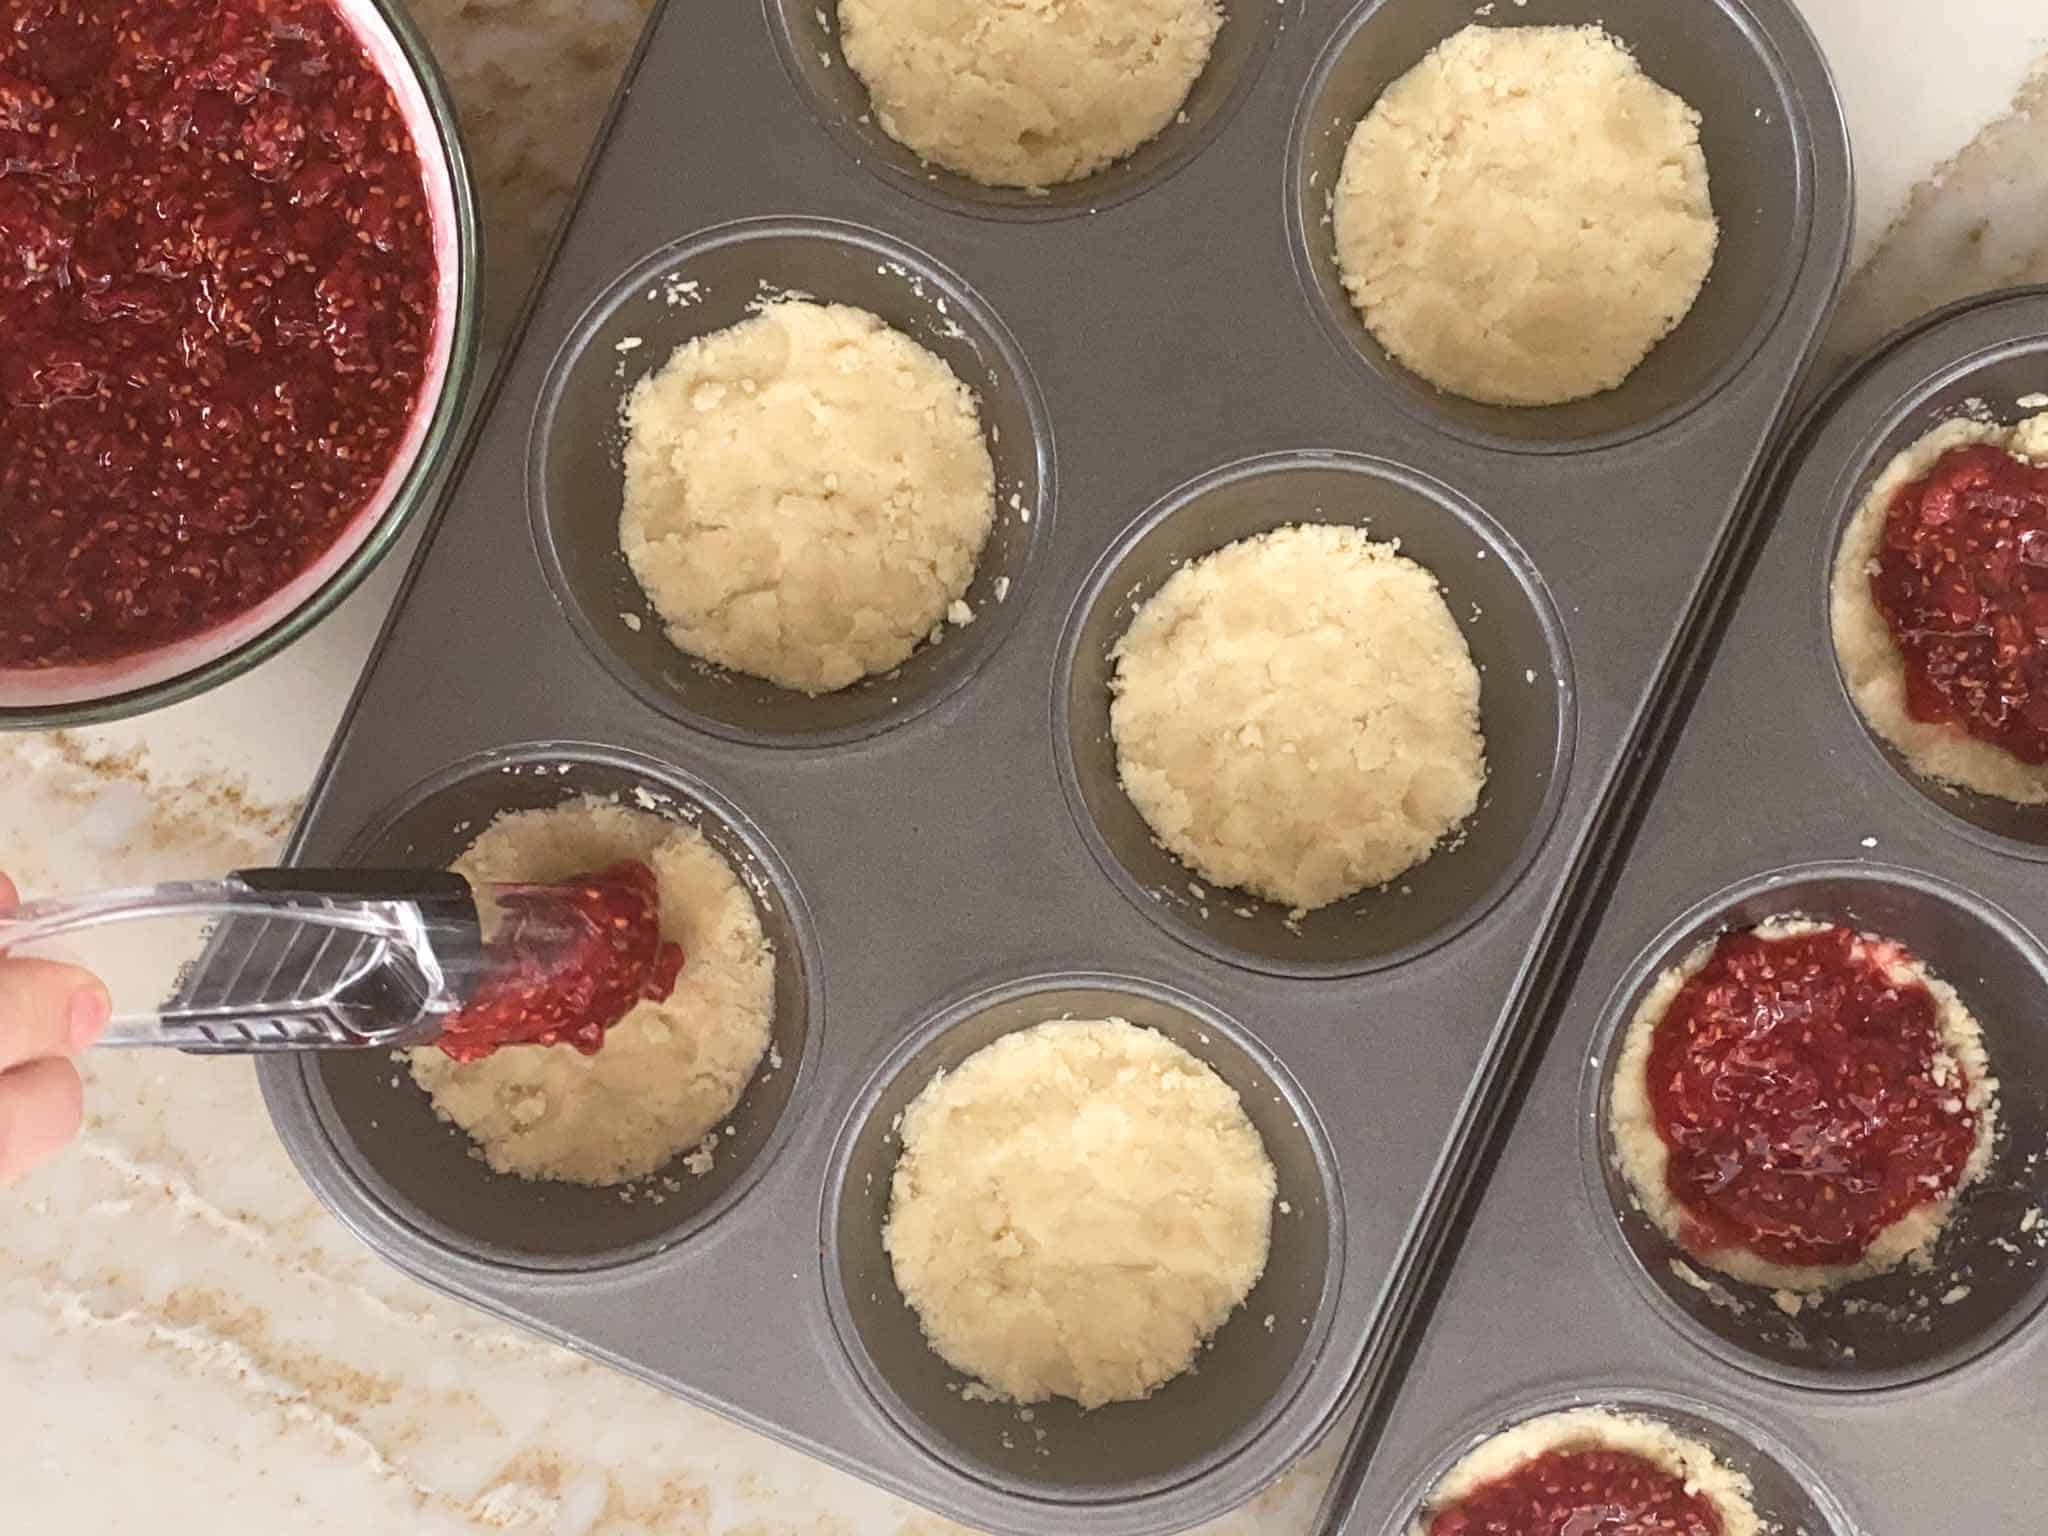 Raspberry jam being spread on the raw crumble cookies.